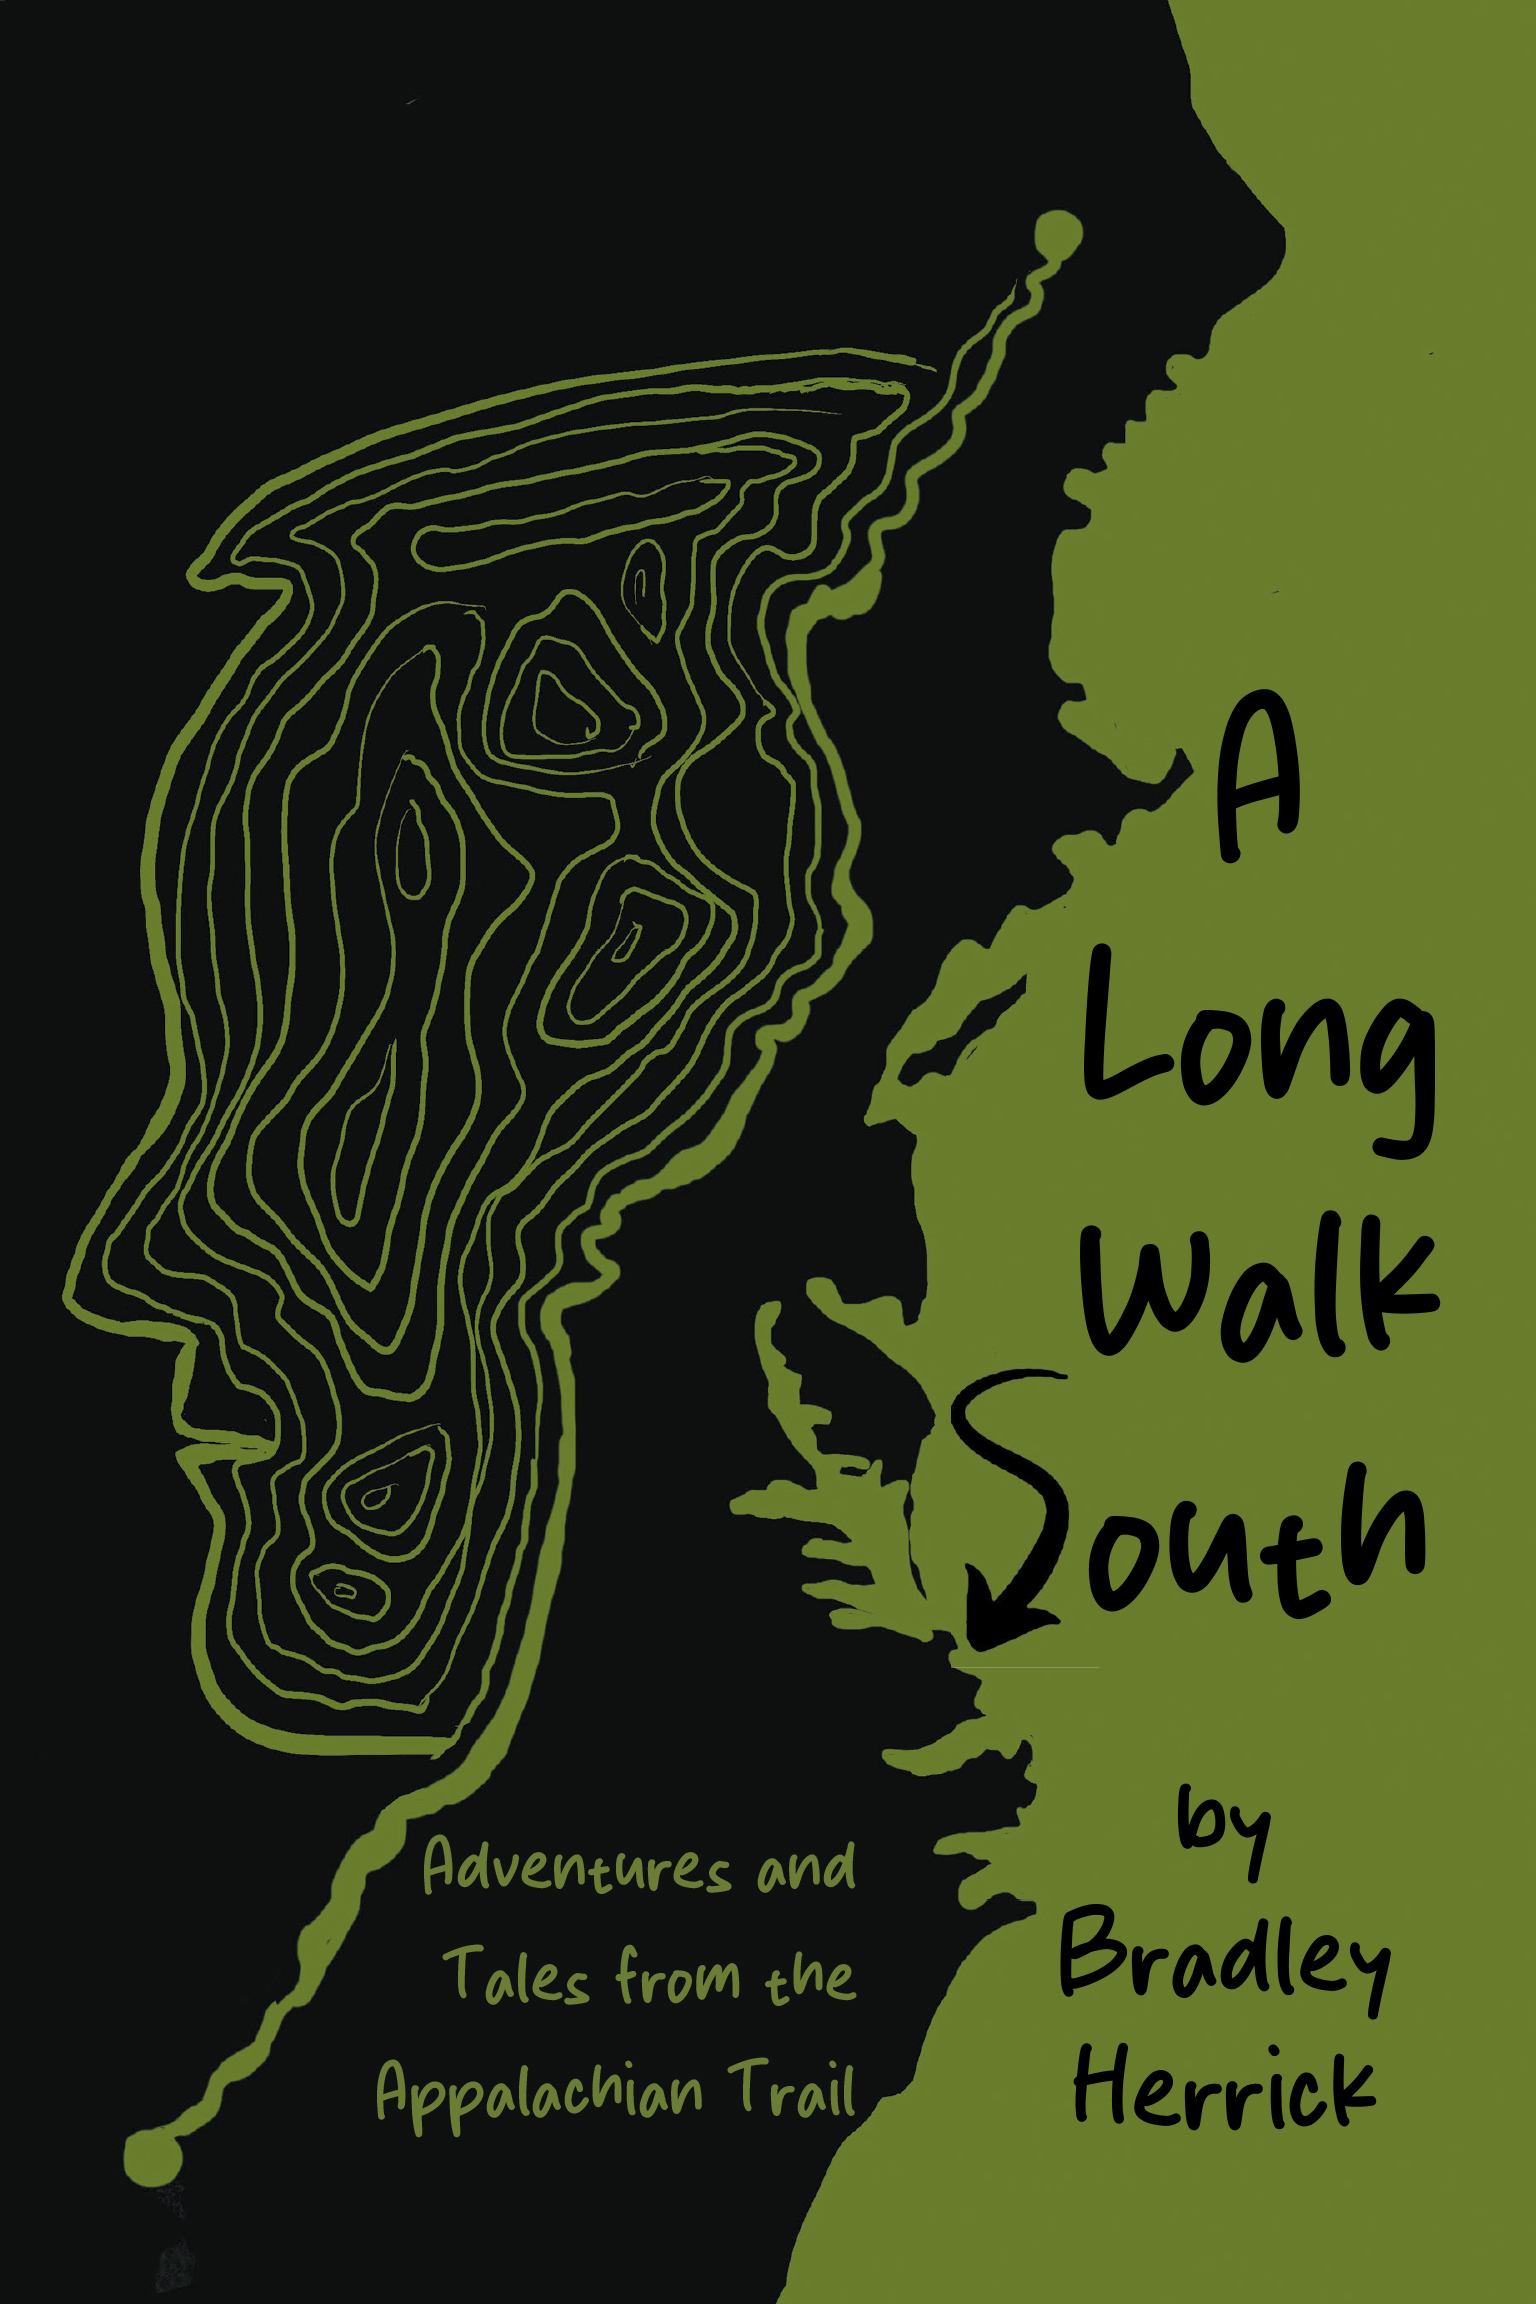 Author Bradley Herrick’s New Book, "A Long Walk South: Adventures and Tales from the Appalachian Trail," is an Unforgettable True-Life Adventure